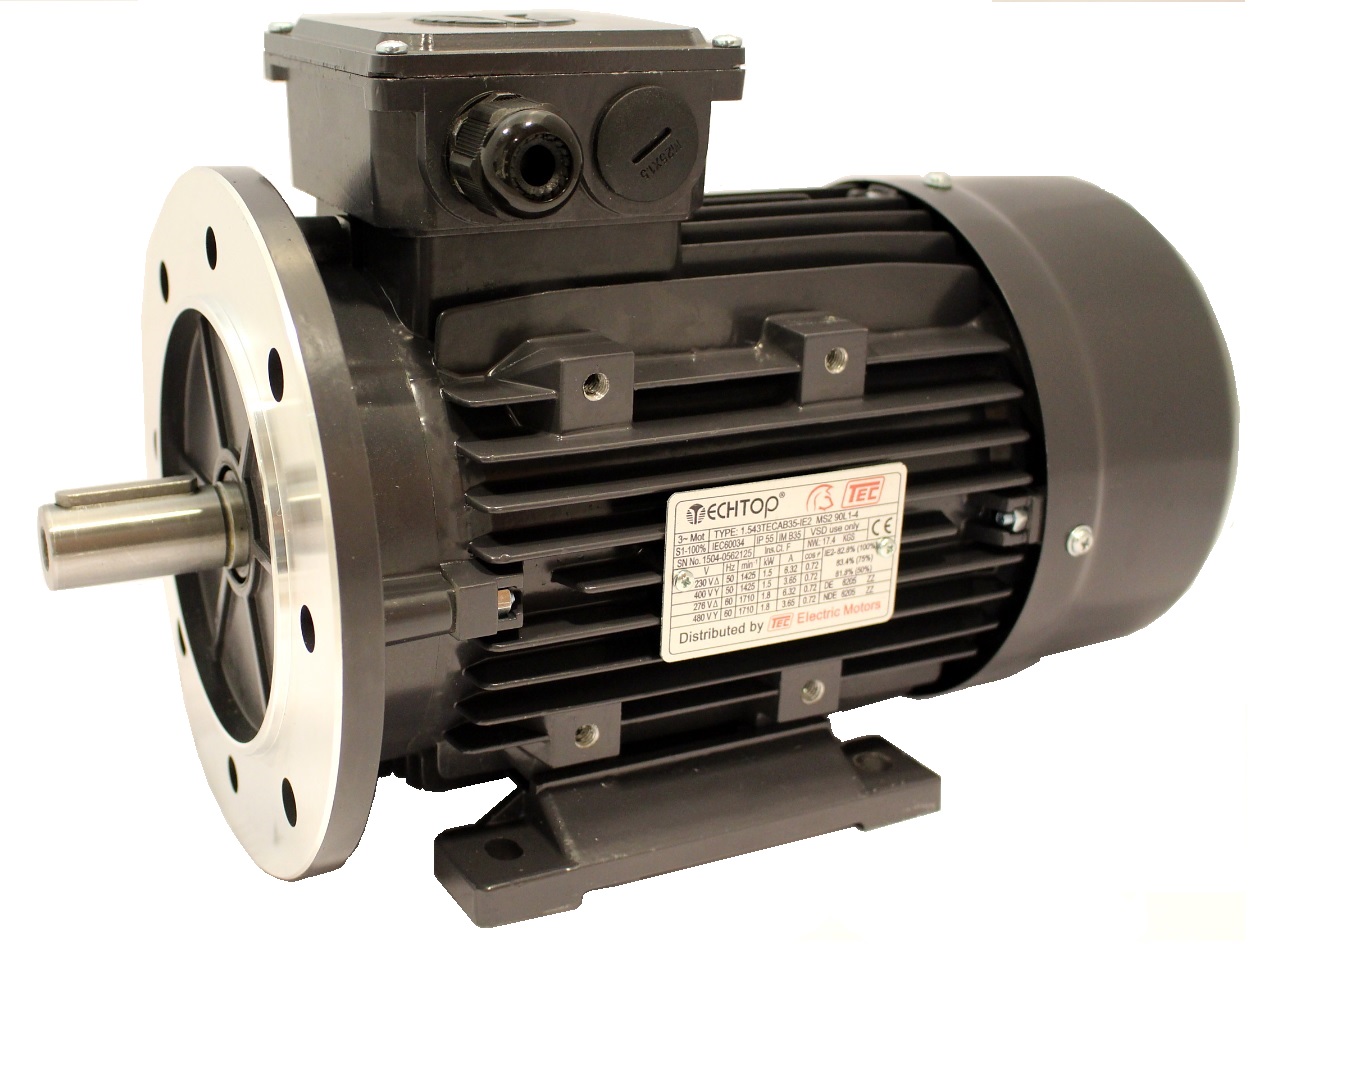 Three Phase 400v Electric Motor, 2.2Kw 4 pole 1450rpm with flange and foot mount IE3